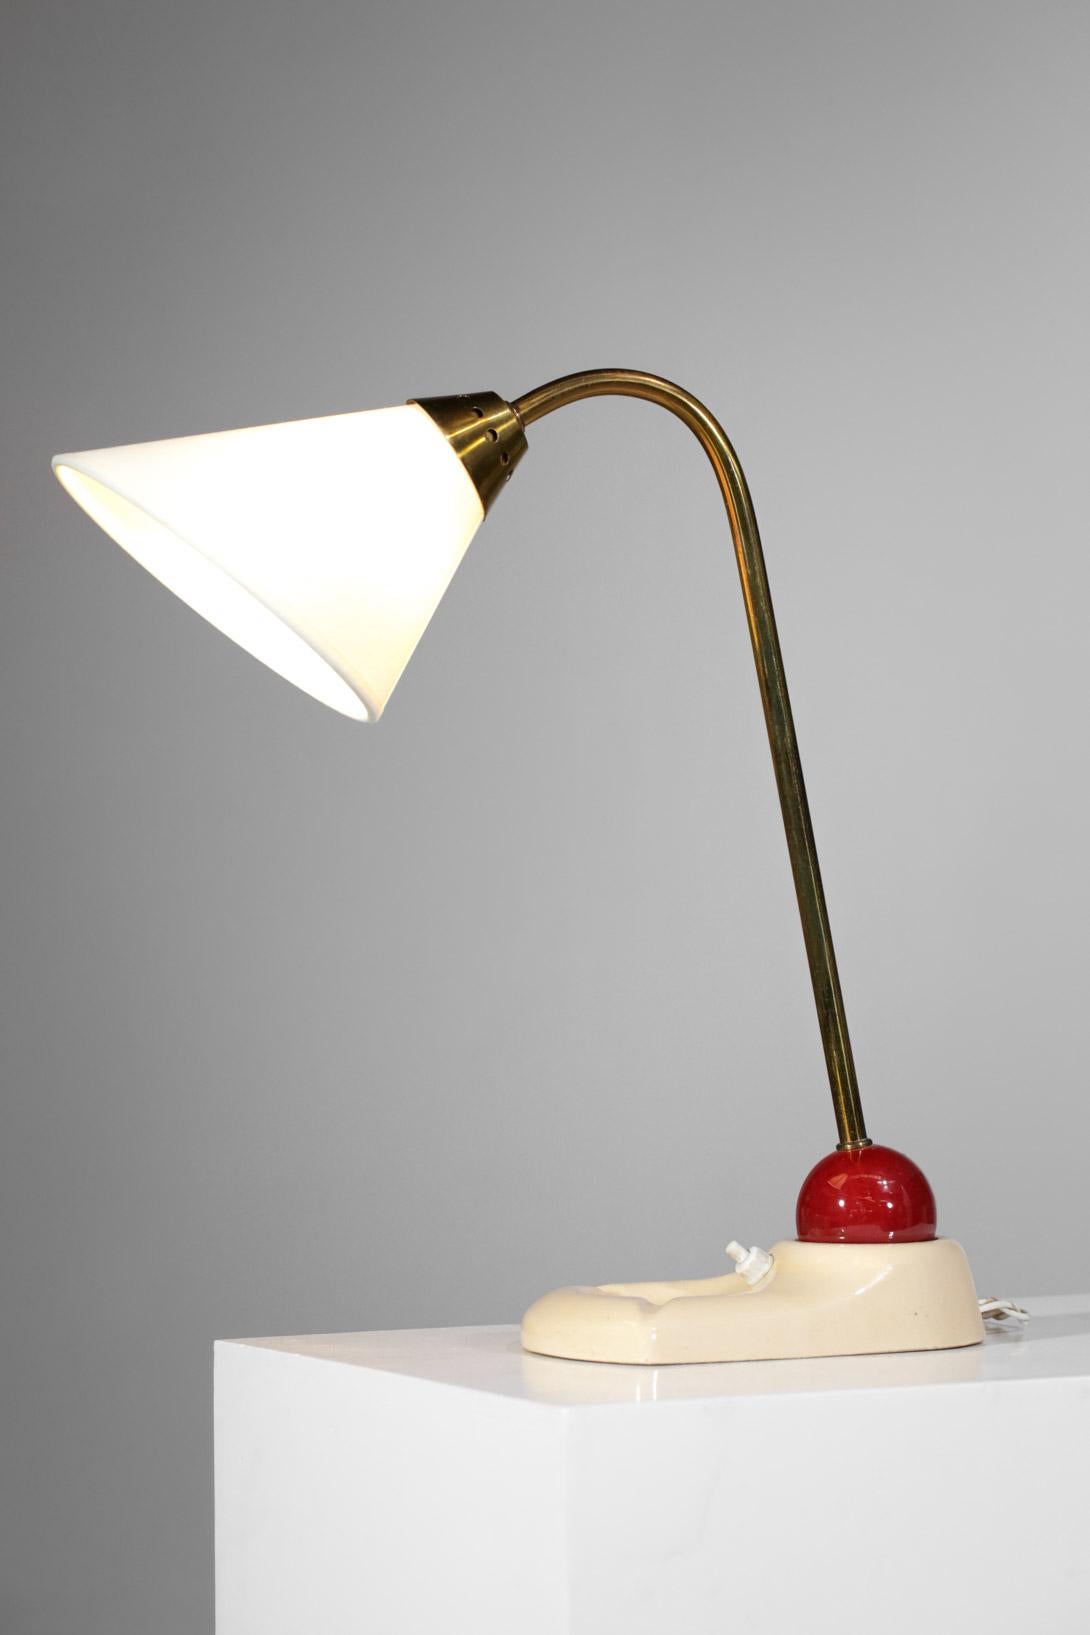 Mid-20th Century French Ceramic Table Lamp 60's Ball in Style of George Jouve Vintage Brass